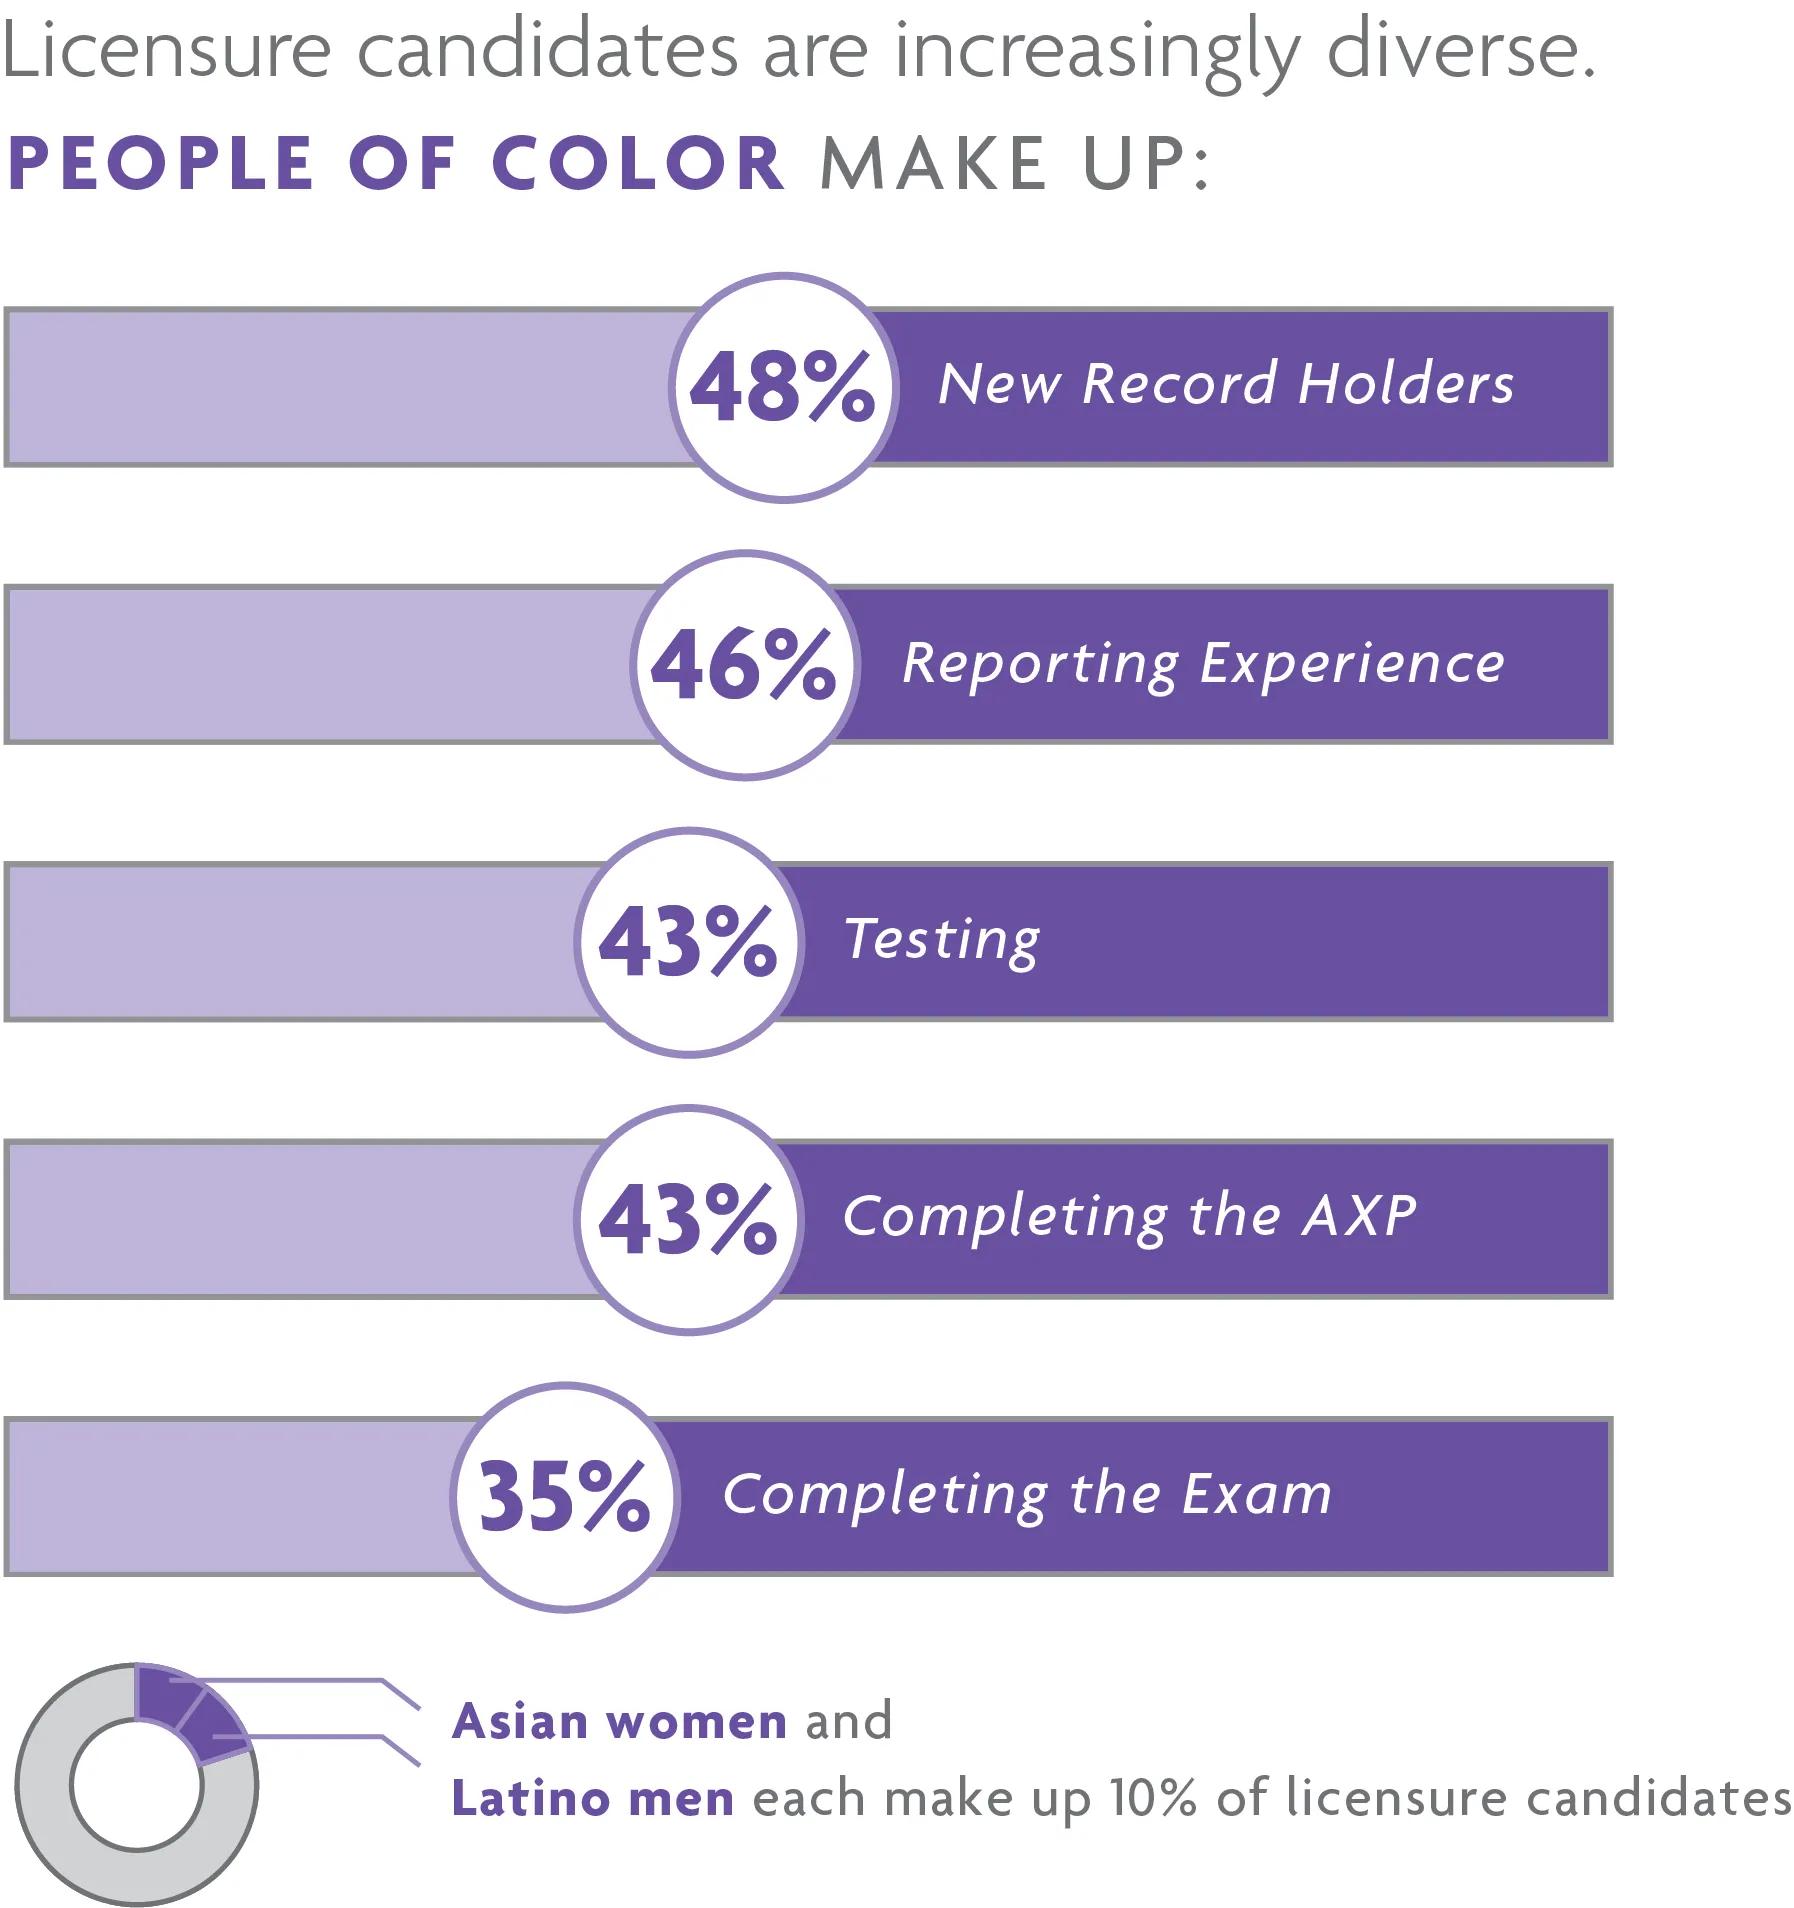 Licensure candidates are seeing increased diversity at every career stage, with 48% of new Record holders identifying as a person of color. For help with data accessibility, contact communications@ncarb.org.